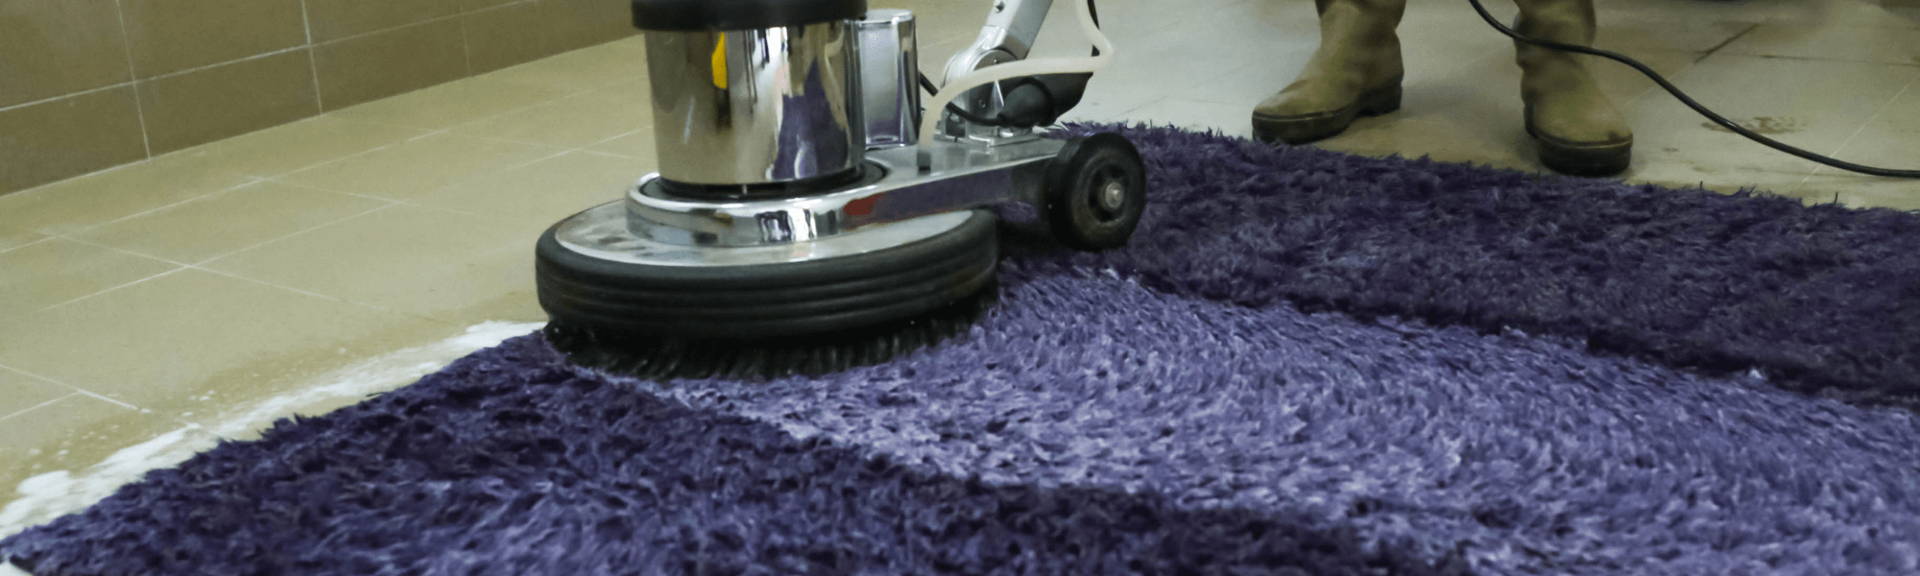 How to vacuum a shag rug ?